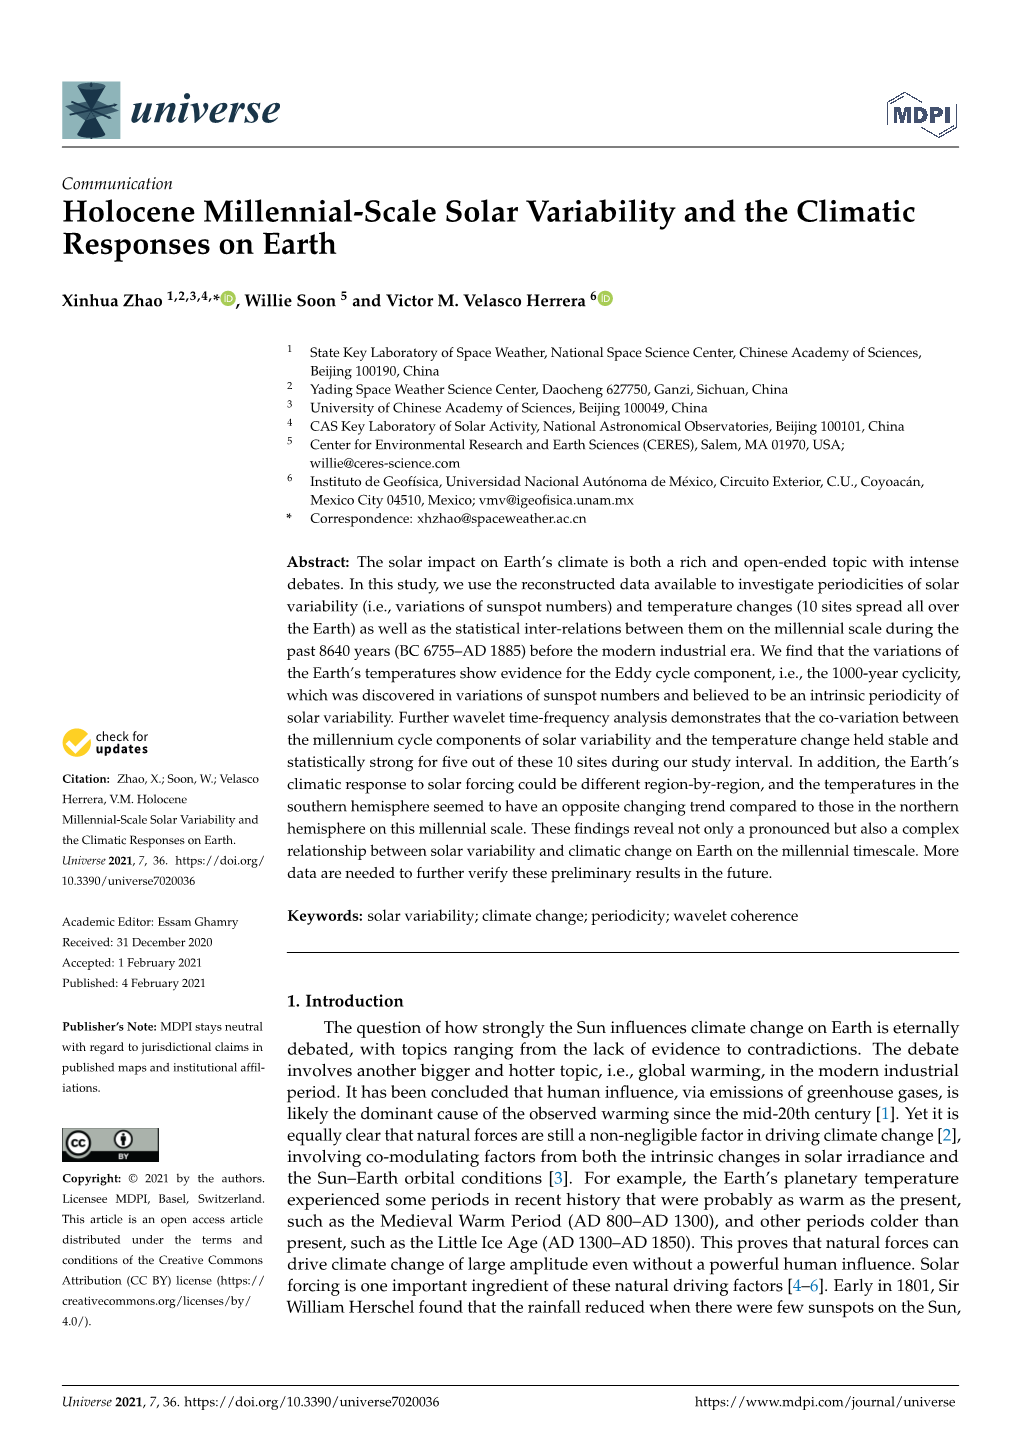 Holocene Millennial-Scale Solar Variability and the Climatic Responses on Earth